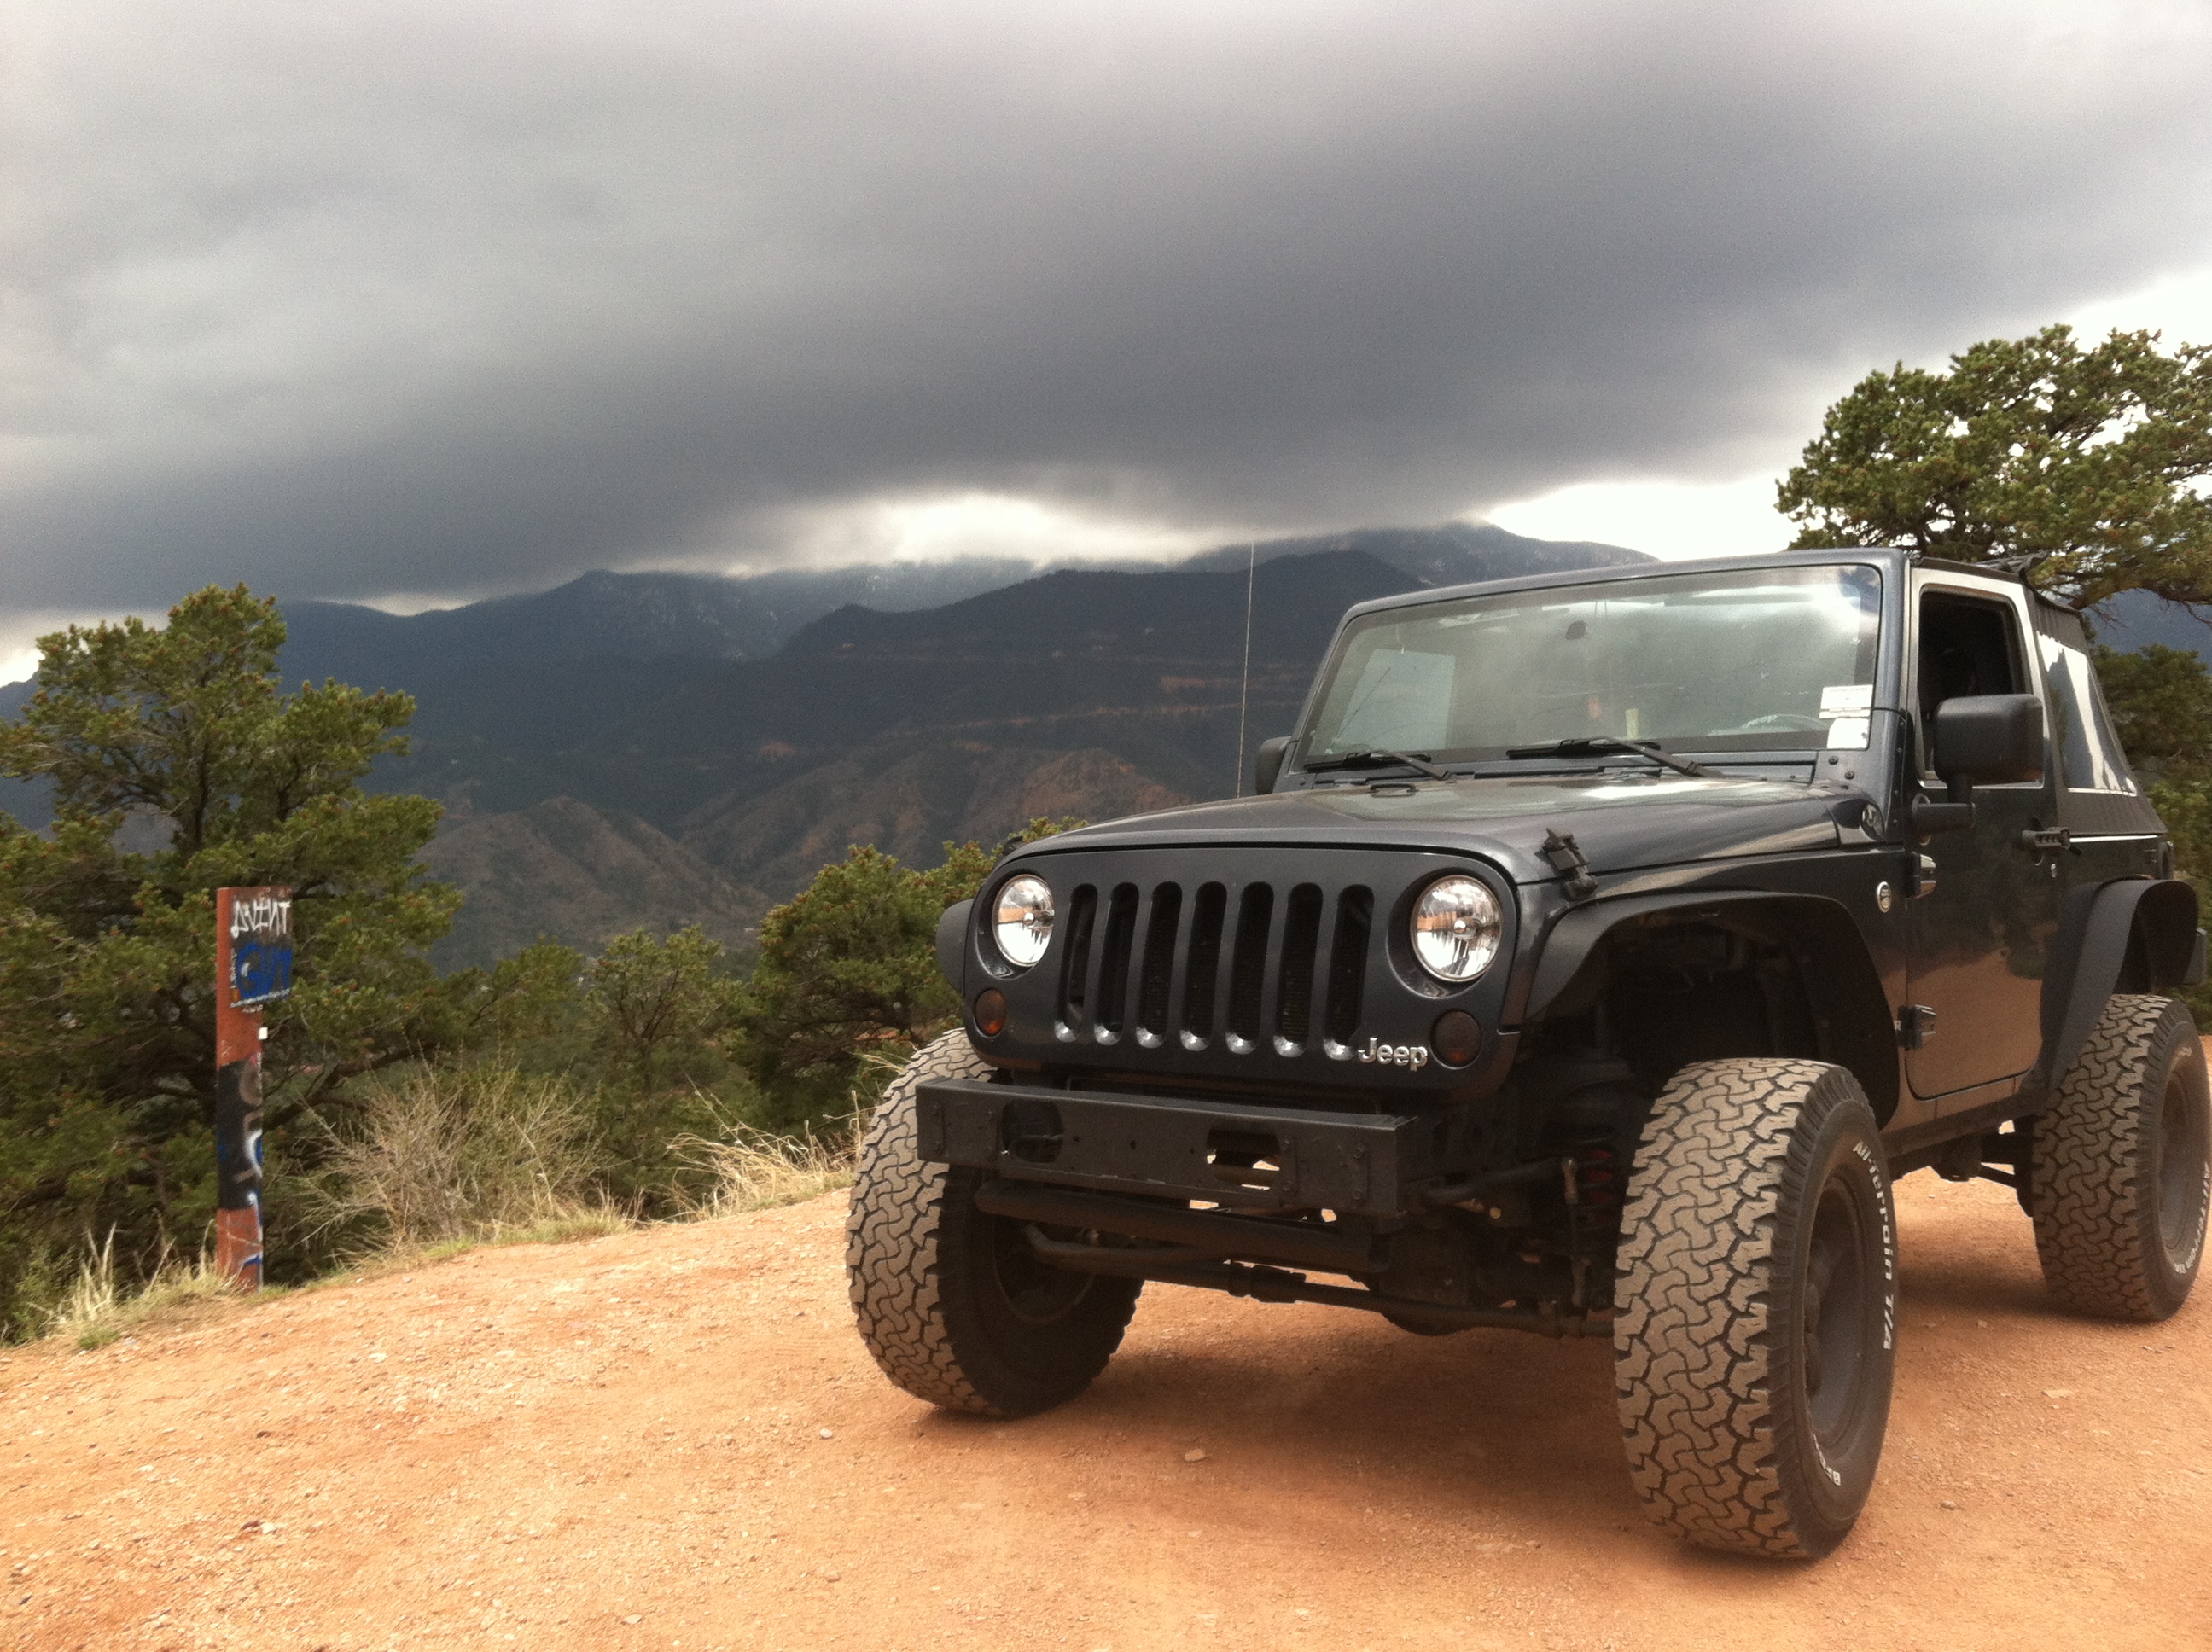 PCM, WCM, or what???? - MERGED  - The top destination for Jeep  JK and JL Wrangler news, rumors, and discussion